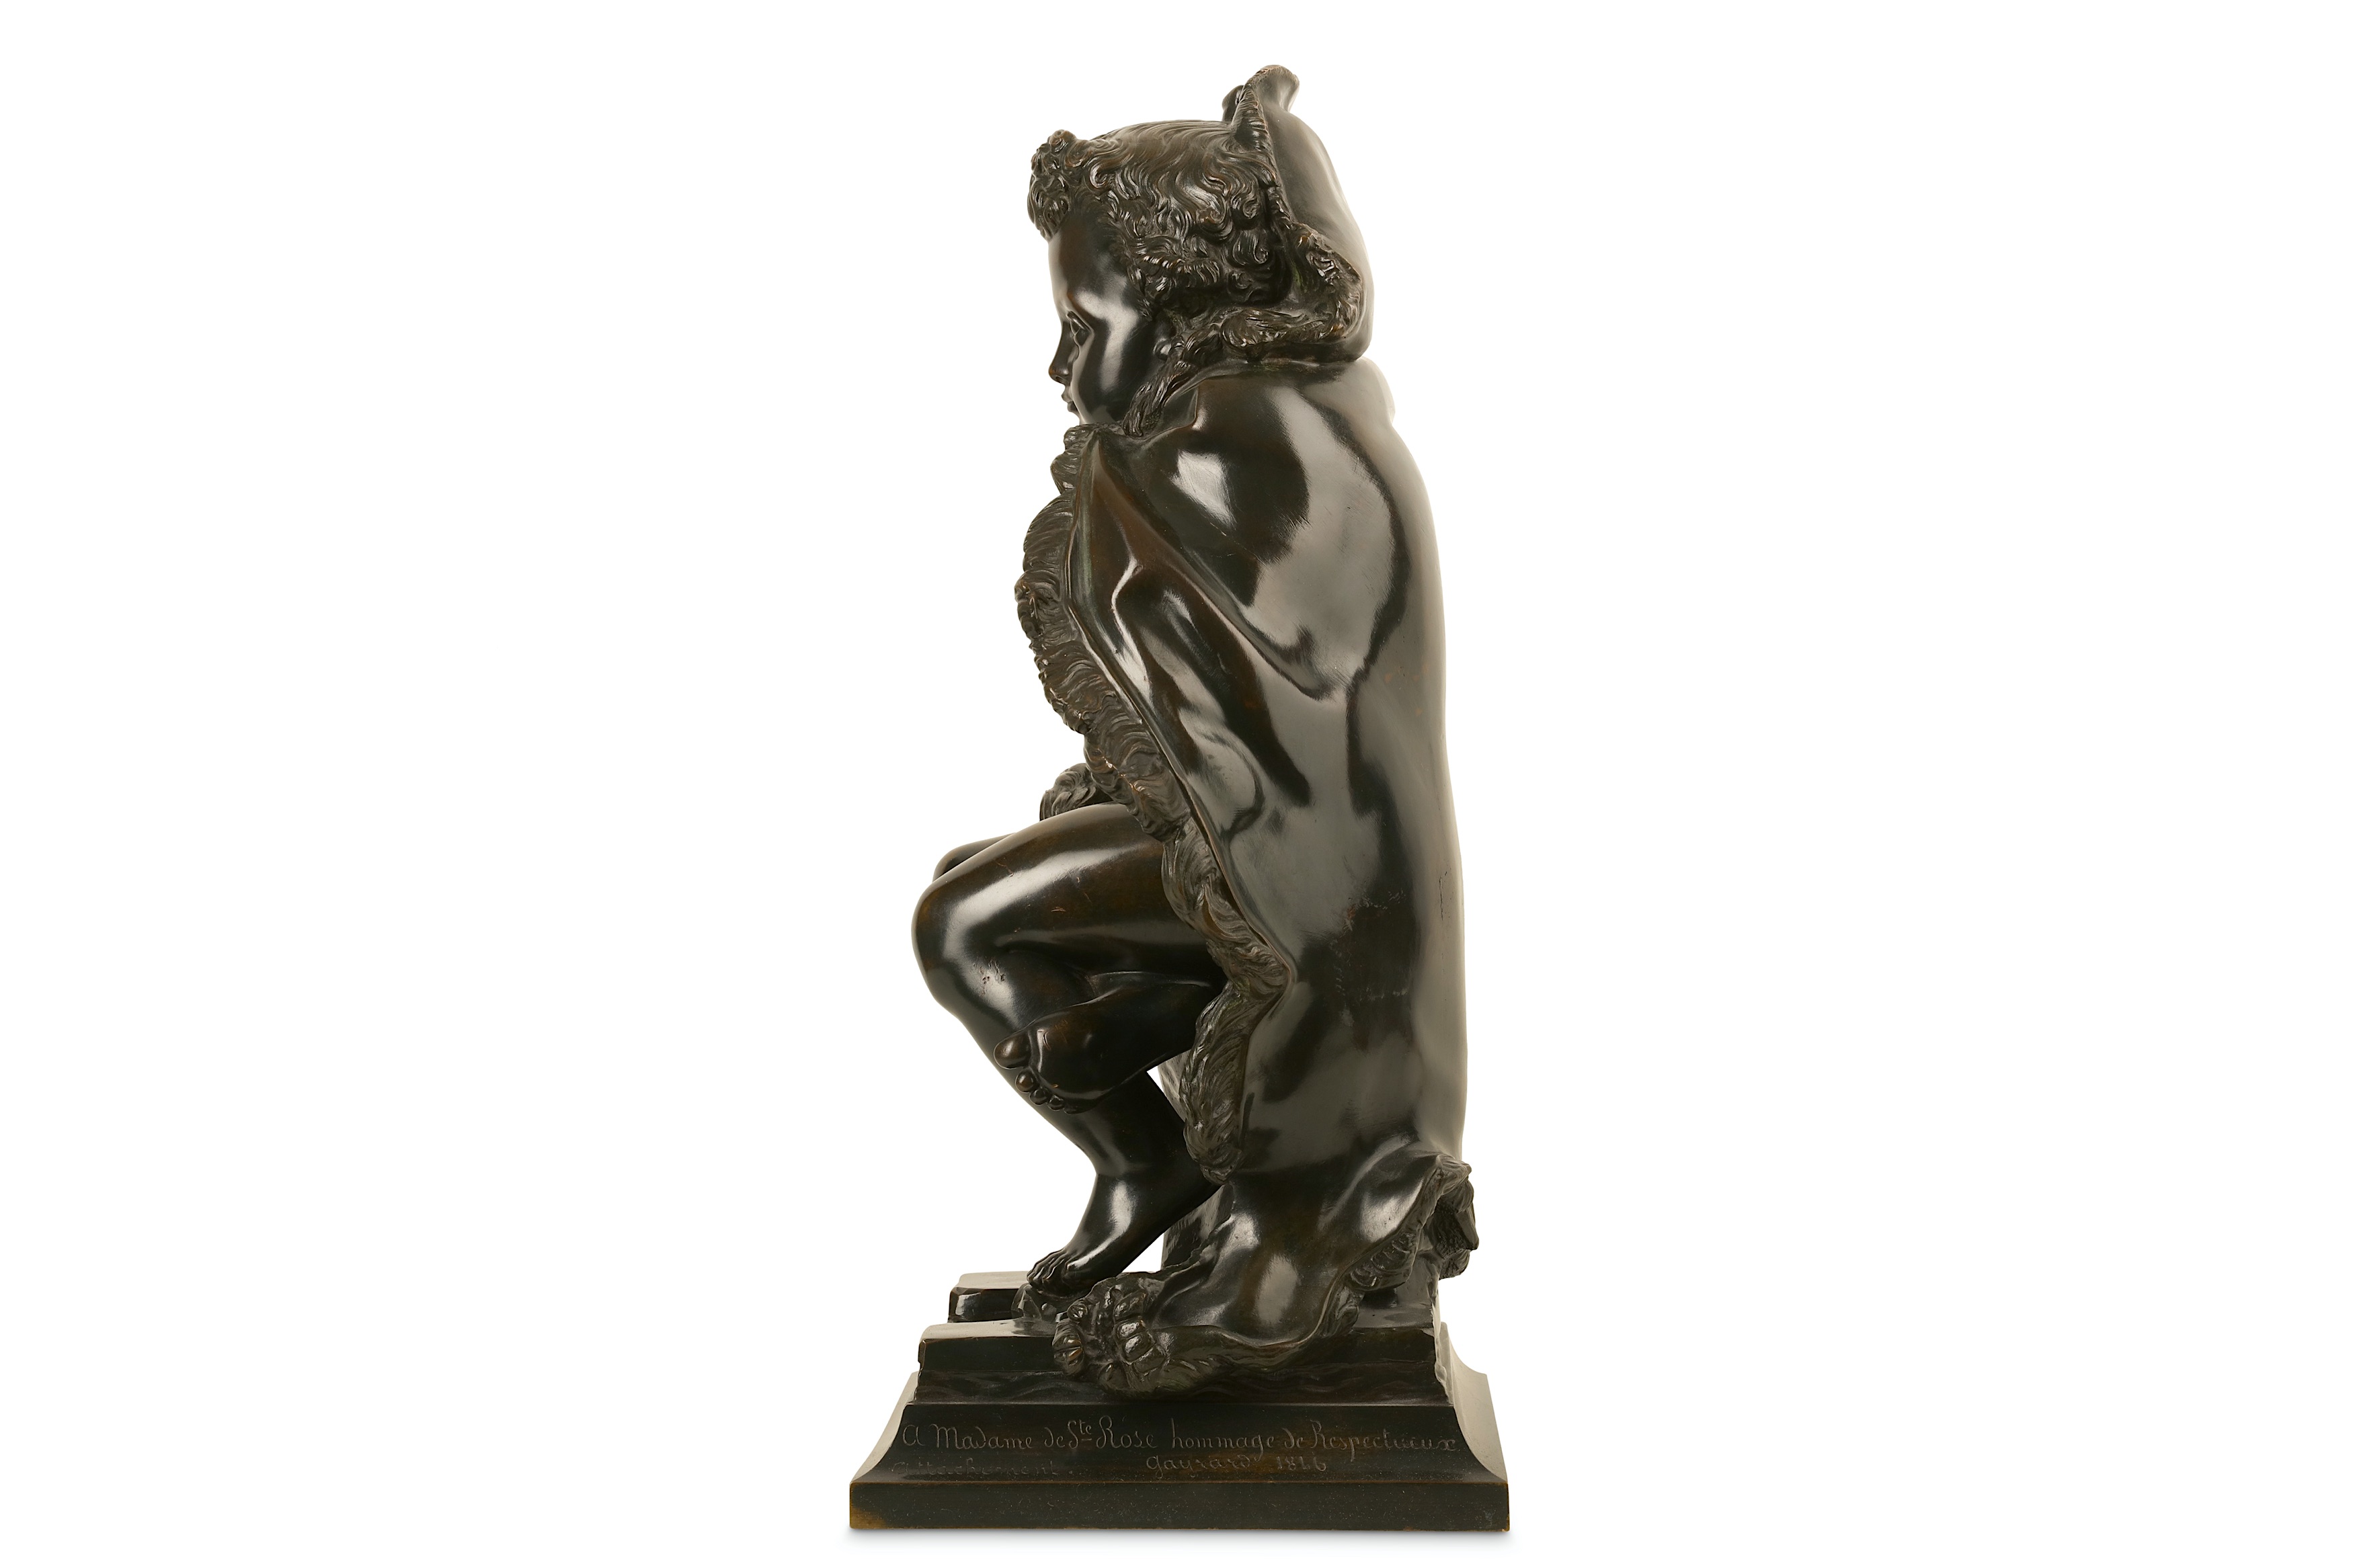 PAUL JOSEPH RAYMOND GAYRARD (FRENCH, 1807-1855): A 19TH CENTURY FRENCH BRONZE FIGURE OF A CHILD - Image 4 of 8